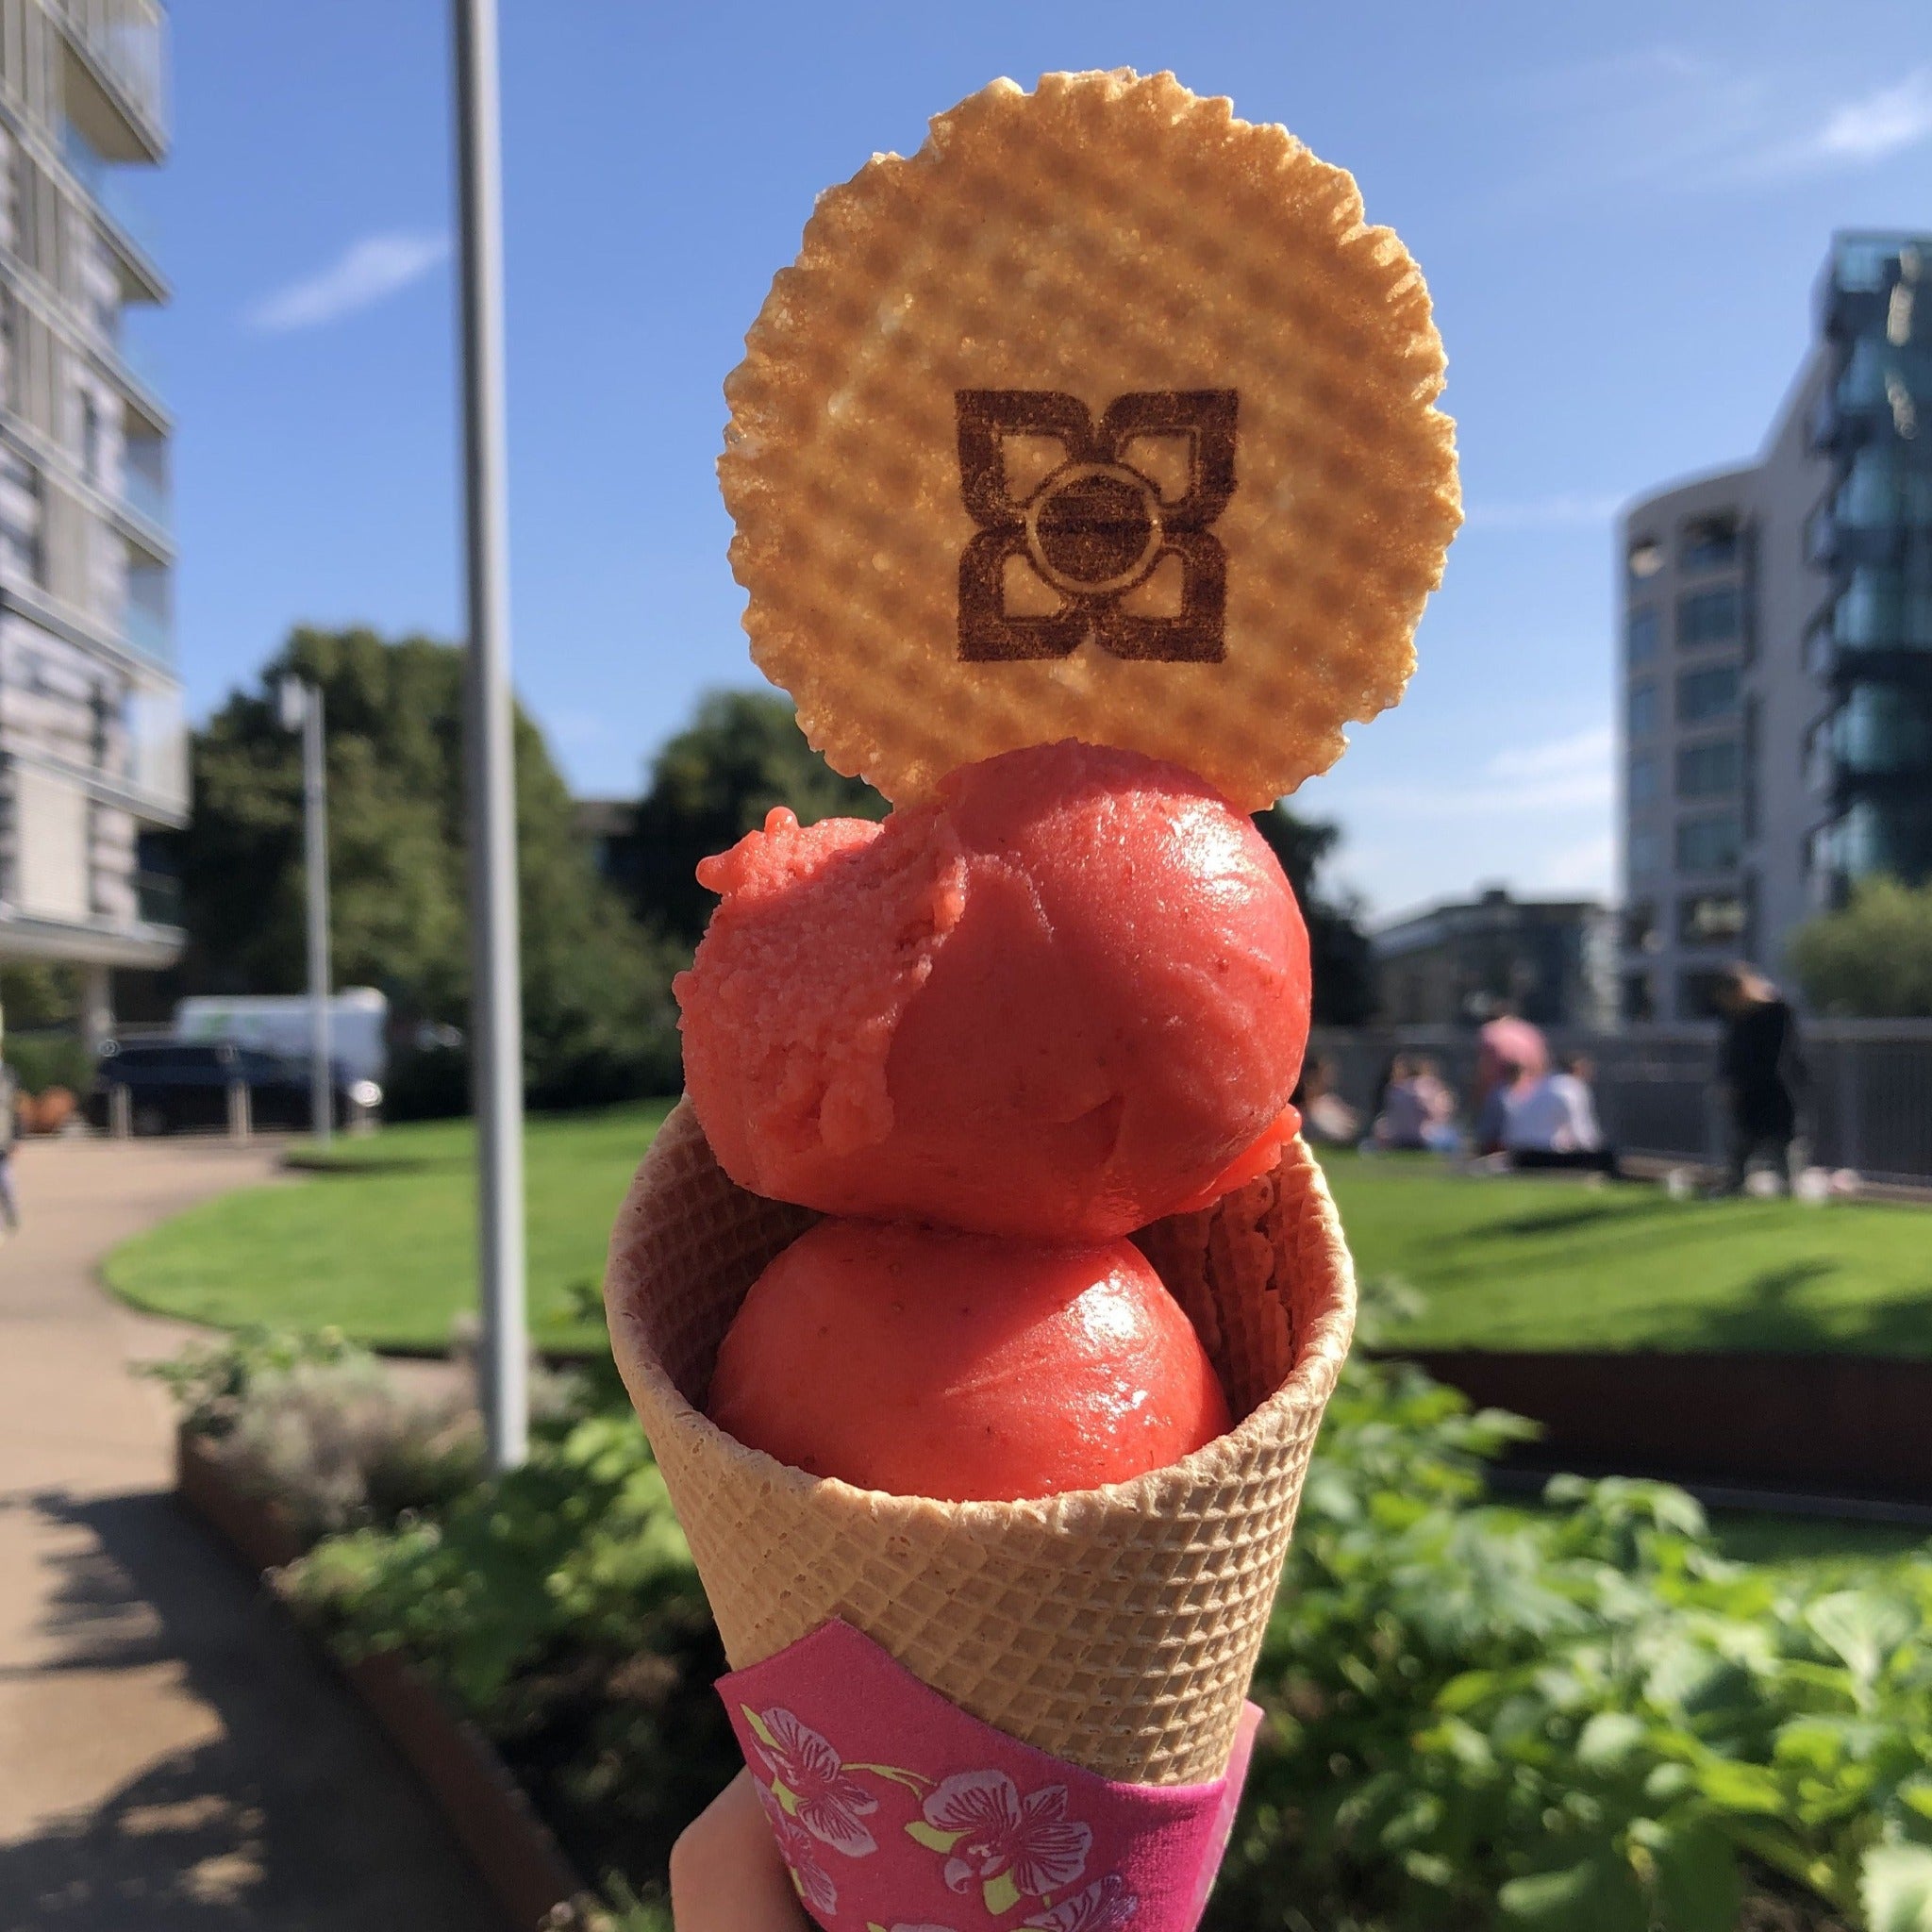 Two scoops of strawberry sorbet in a cone with a wafer